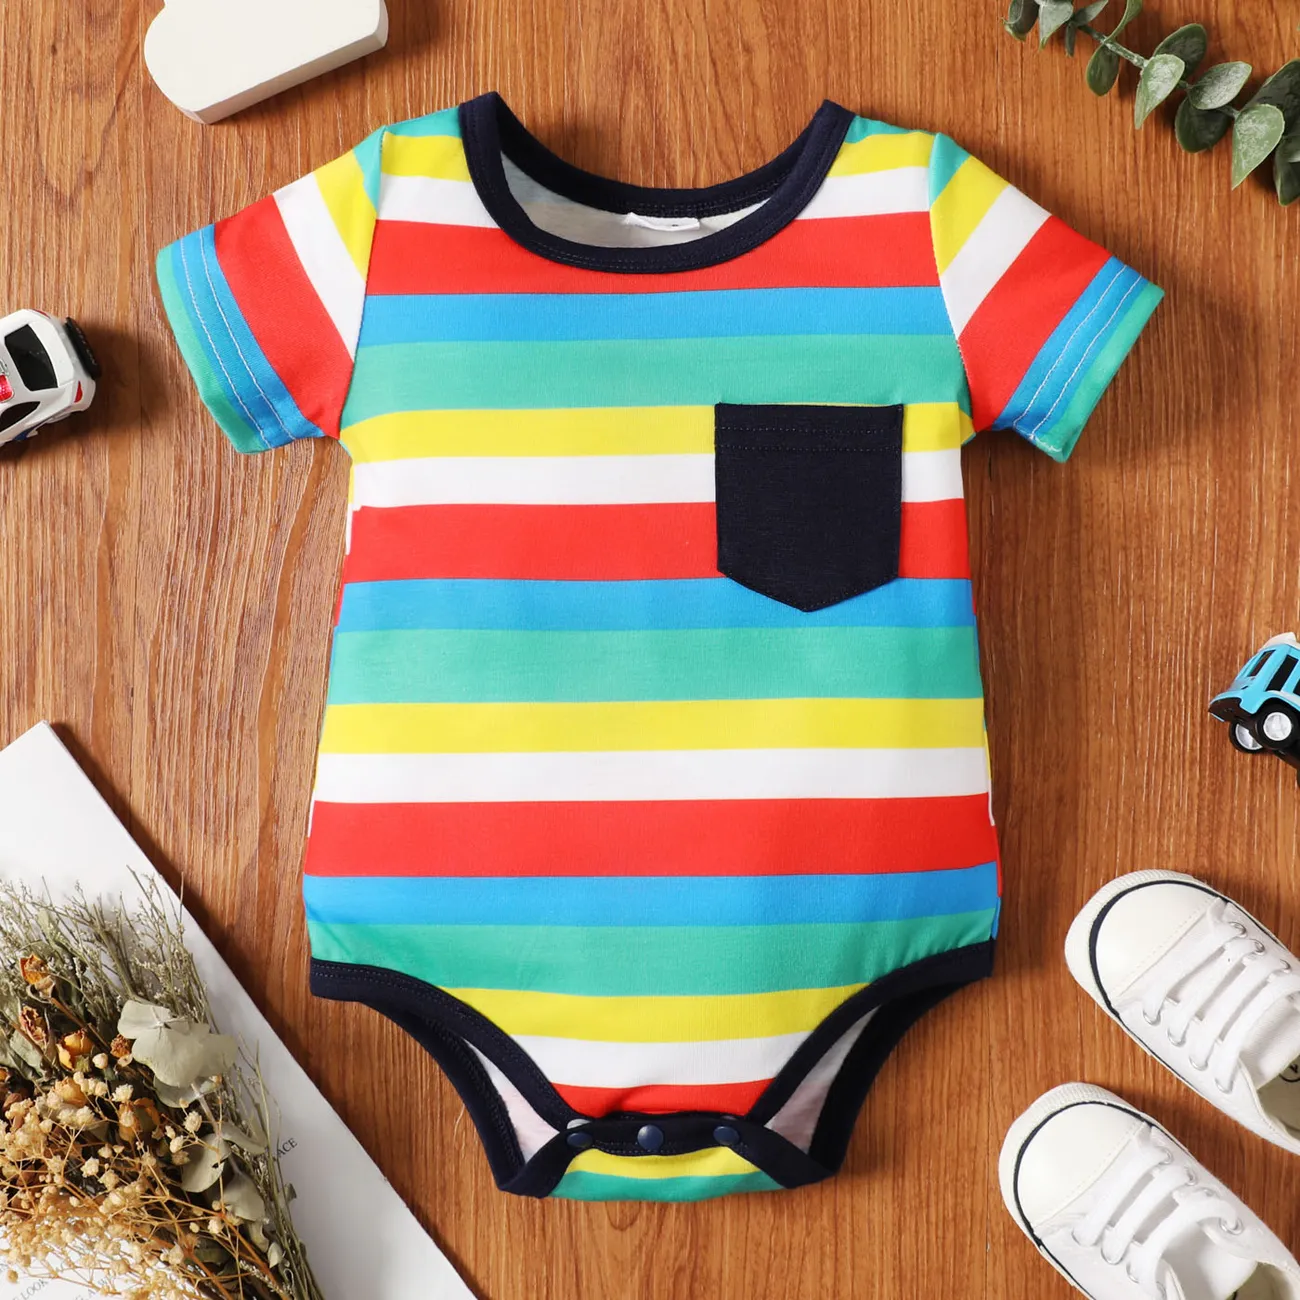 Naia™ Baby Boy Colorful Striped or Vehicle Print Short-sleeve Romper COLOREDSTRIPES big image 1